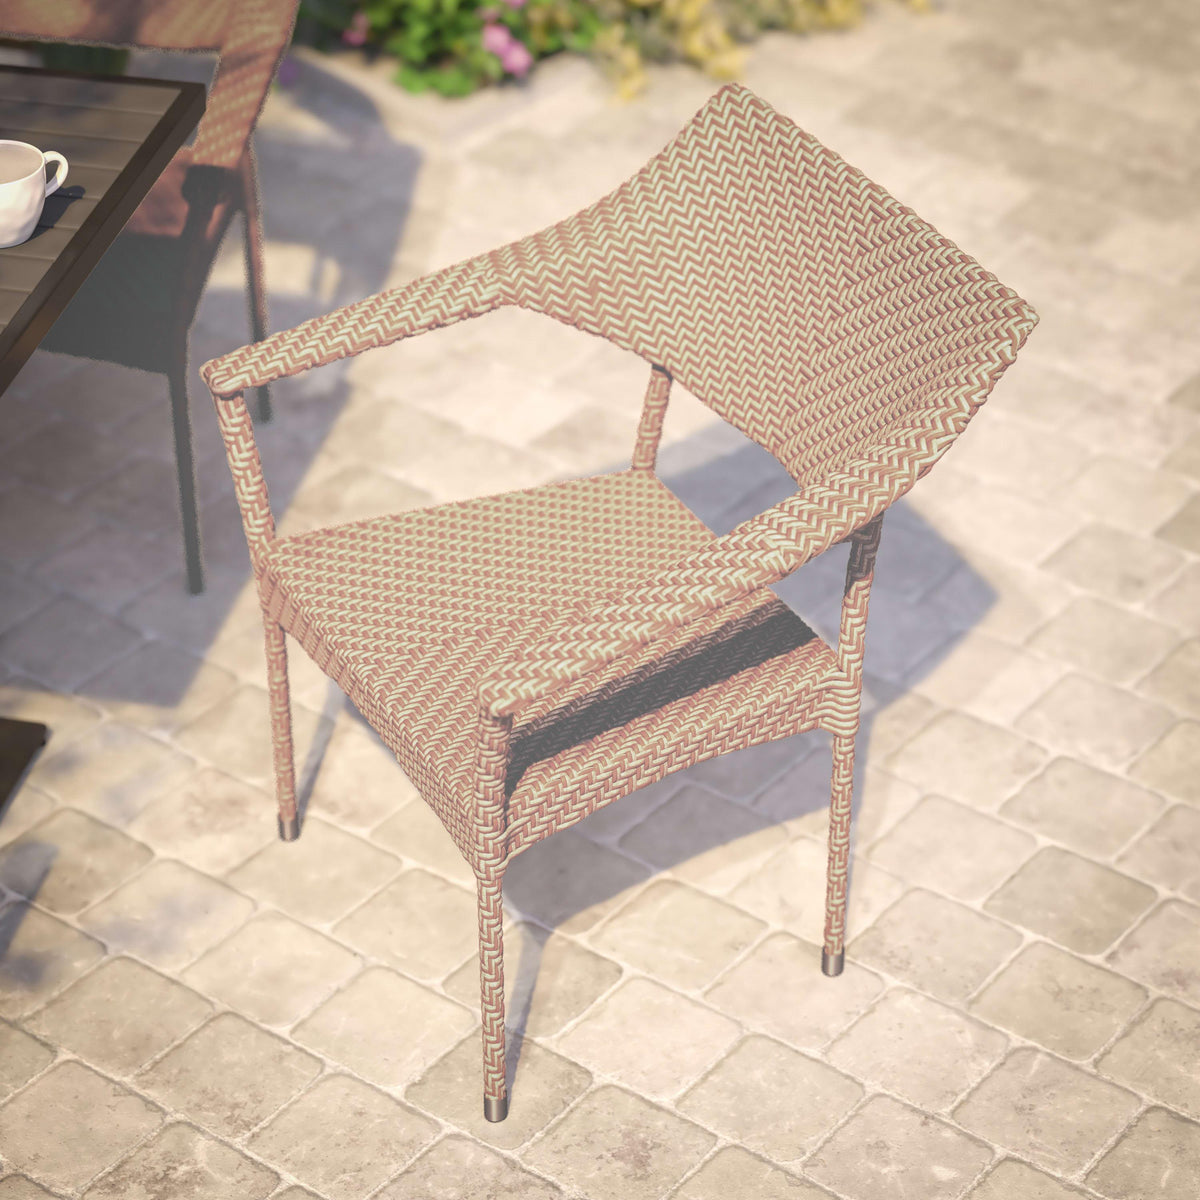 Natural |#| All Weather Commercial Grade PE Rattan Stacking Patio Chairs in Natural